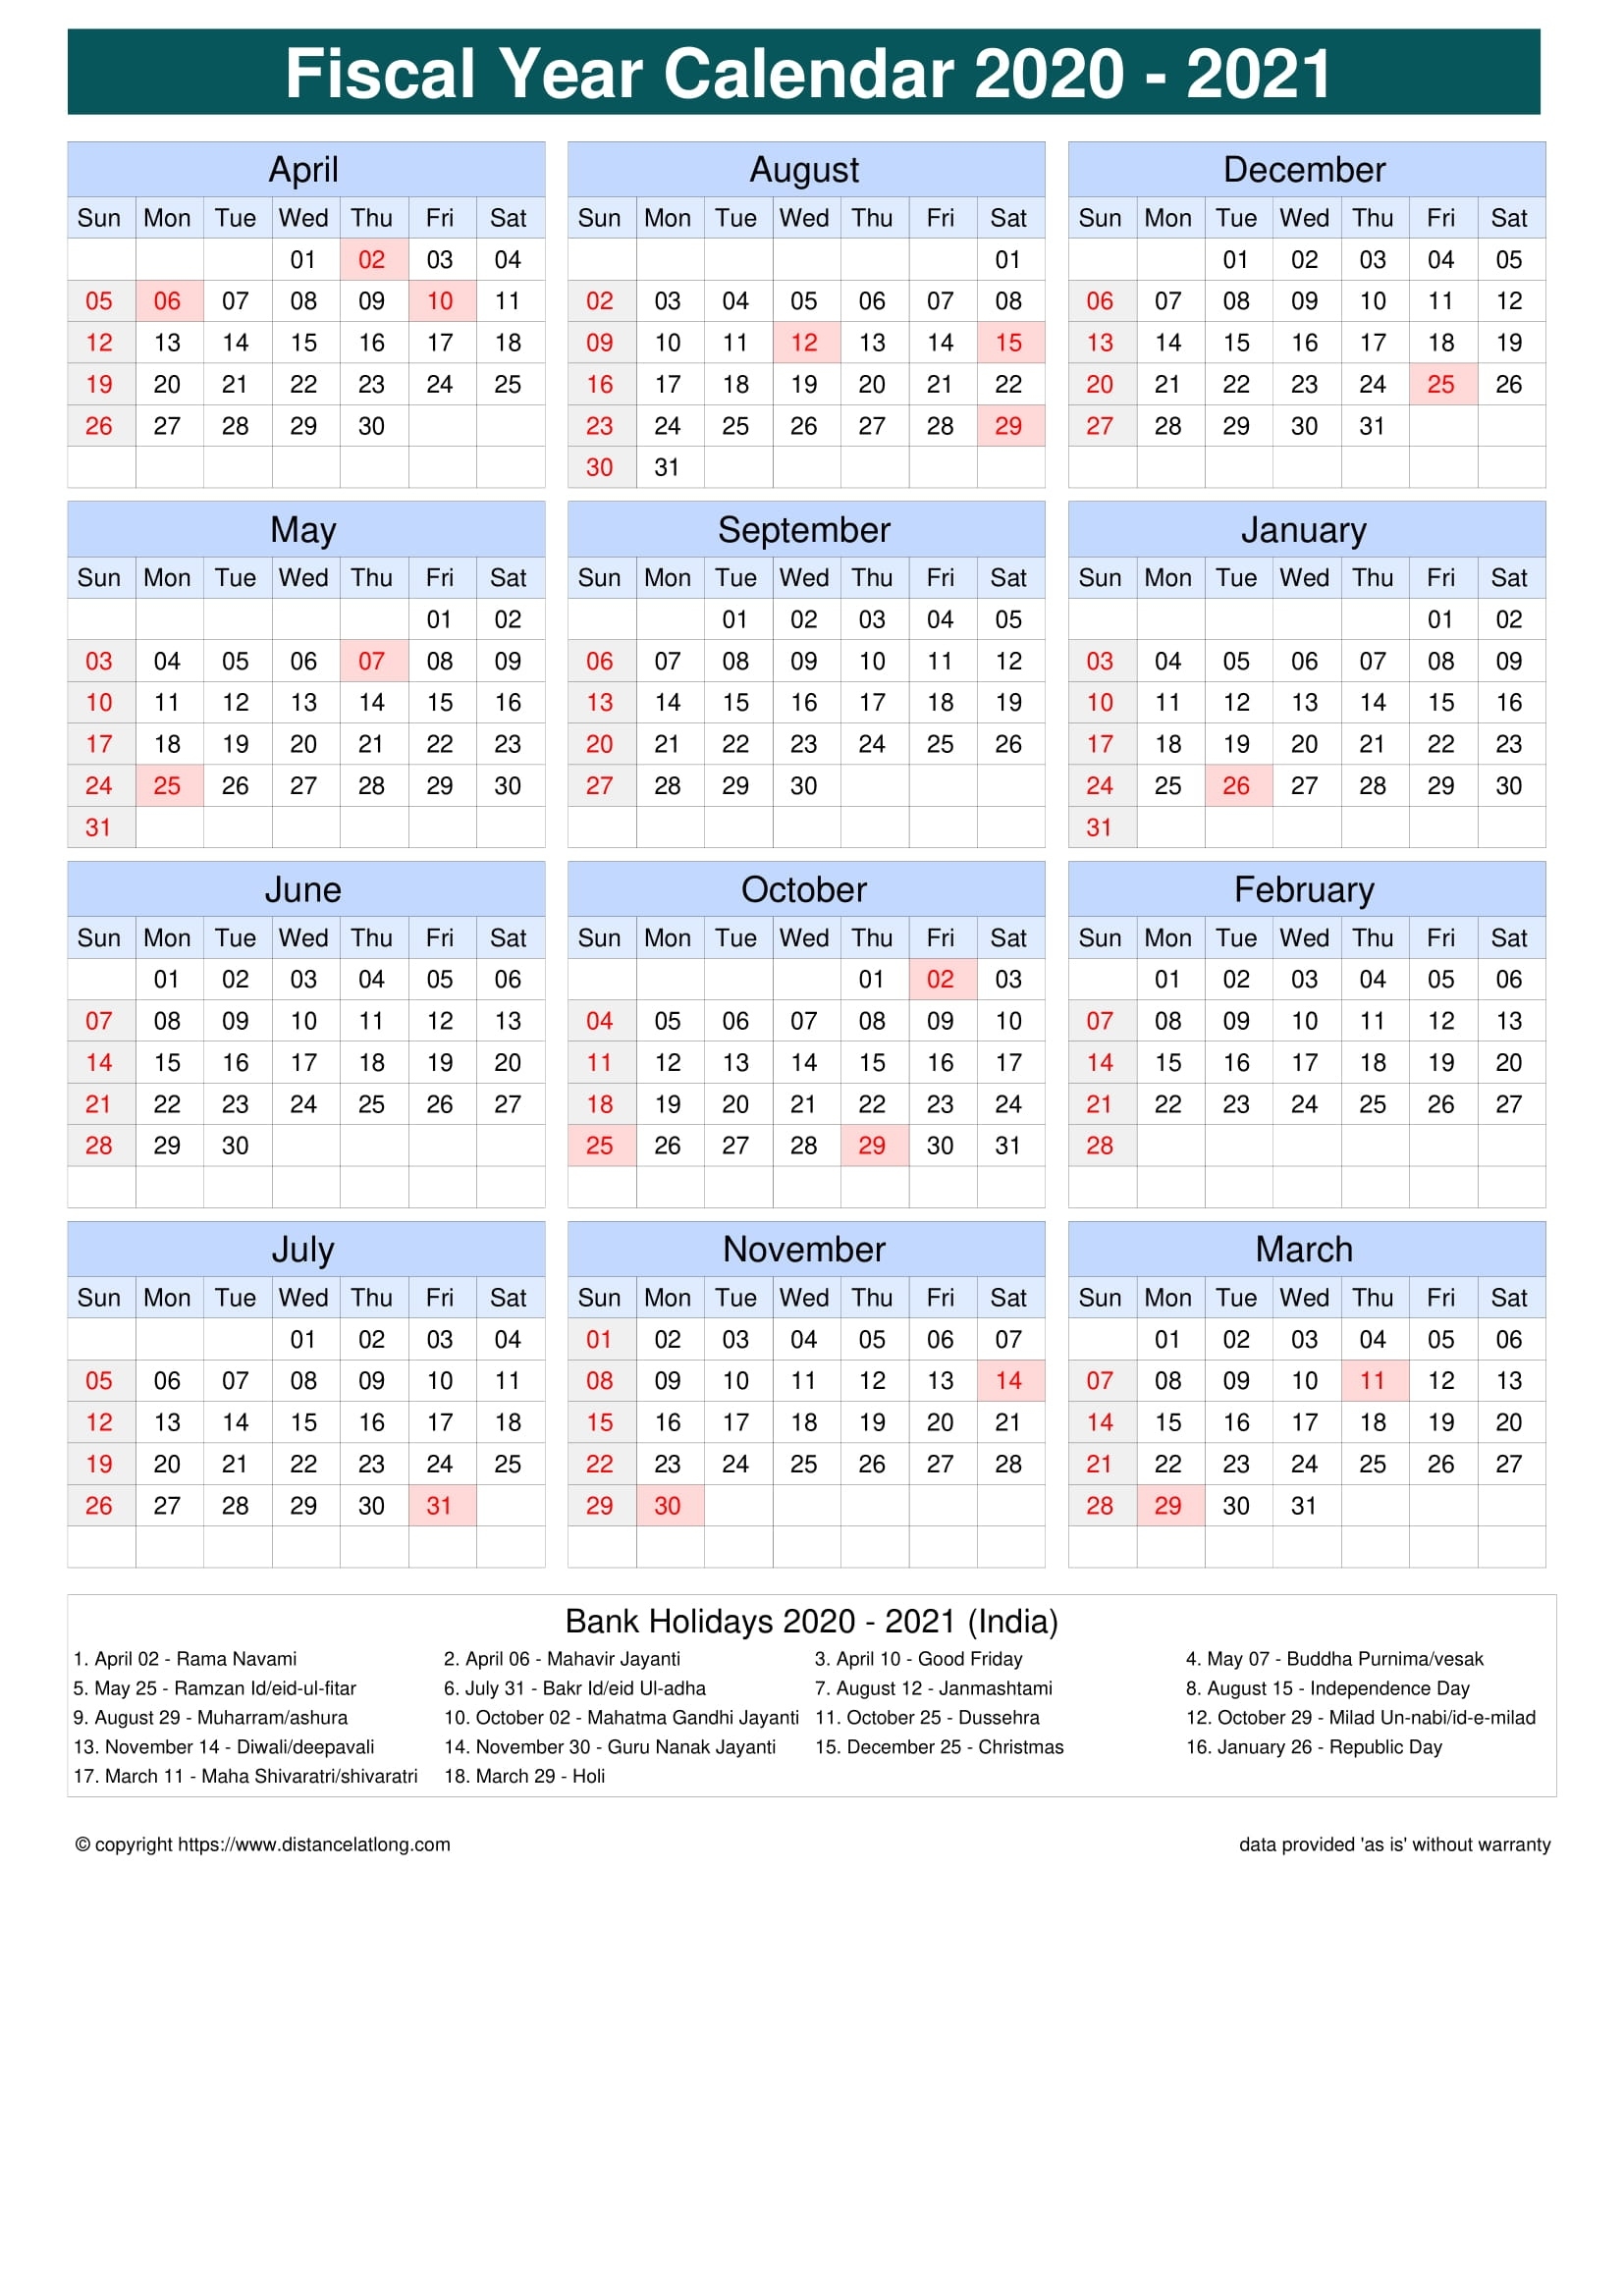 Fiscal Portrait Calendar Vertical Grid Sunday To Saturday Holiday India Portrait 2020 2021 November 2021 Calendar With Holidays India